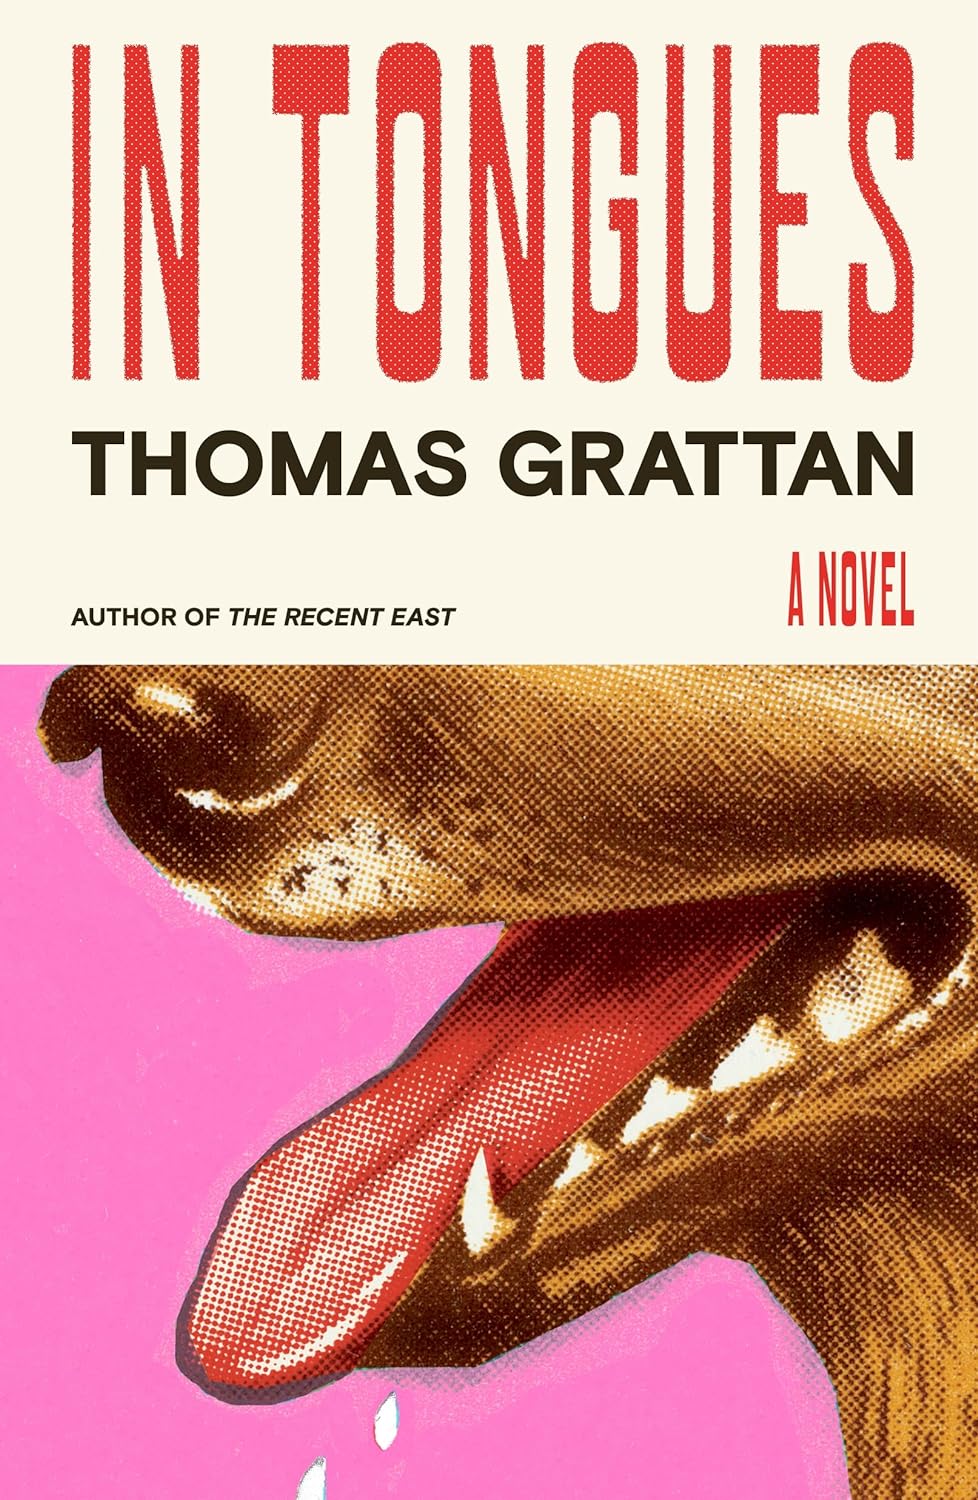 Thomas Grattan, In Tongues; cover design by Alex Merto (MCD, May 21)